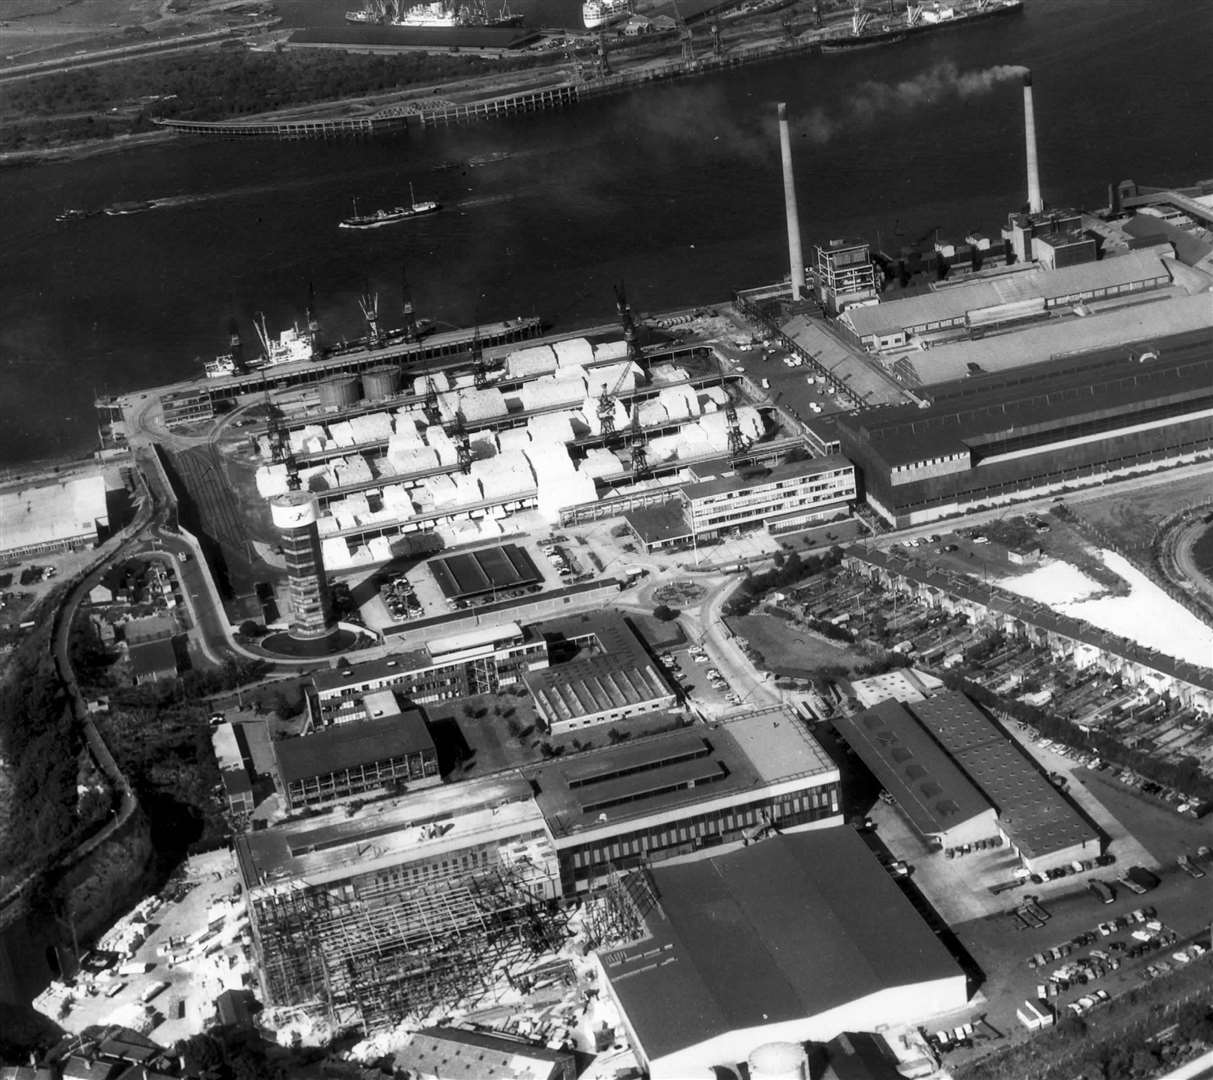 Bowater-Scott paper mill pictured in October 1973